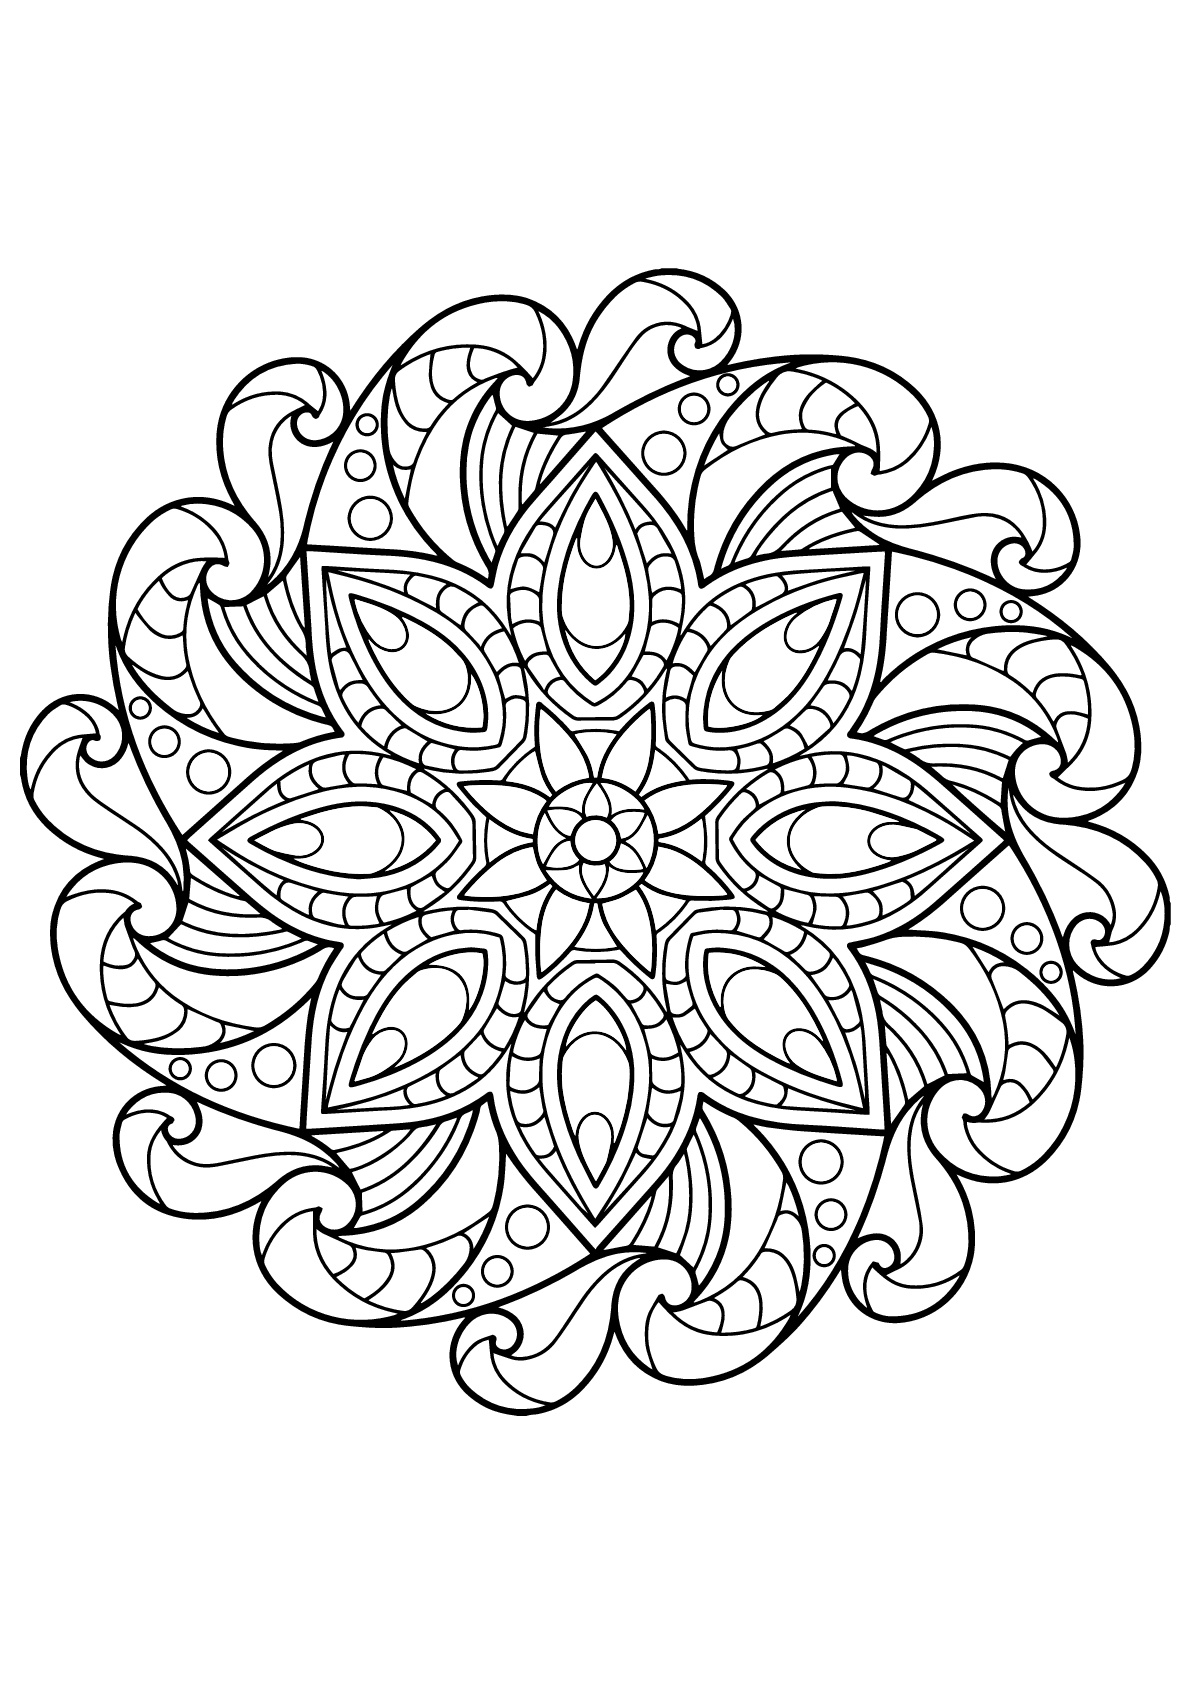 Beautiful Mandala from Free Coloring book for adults